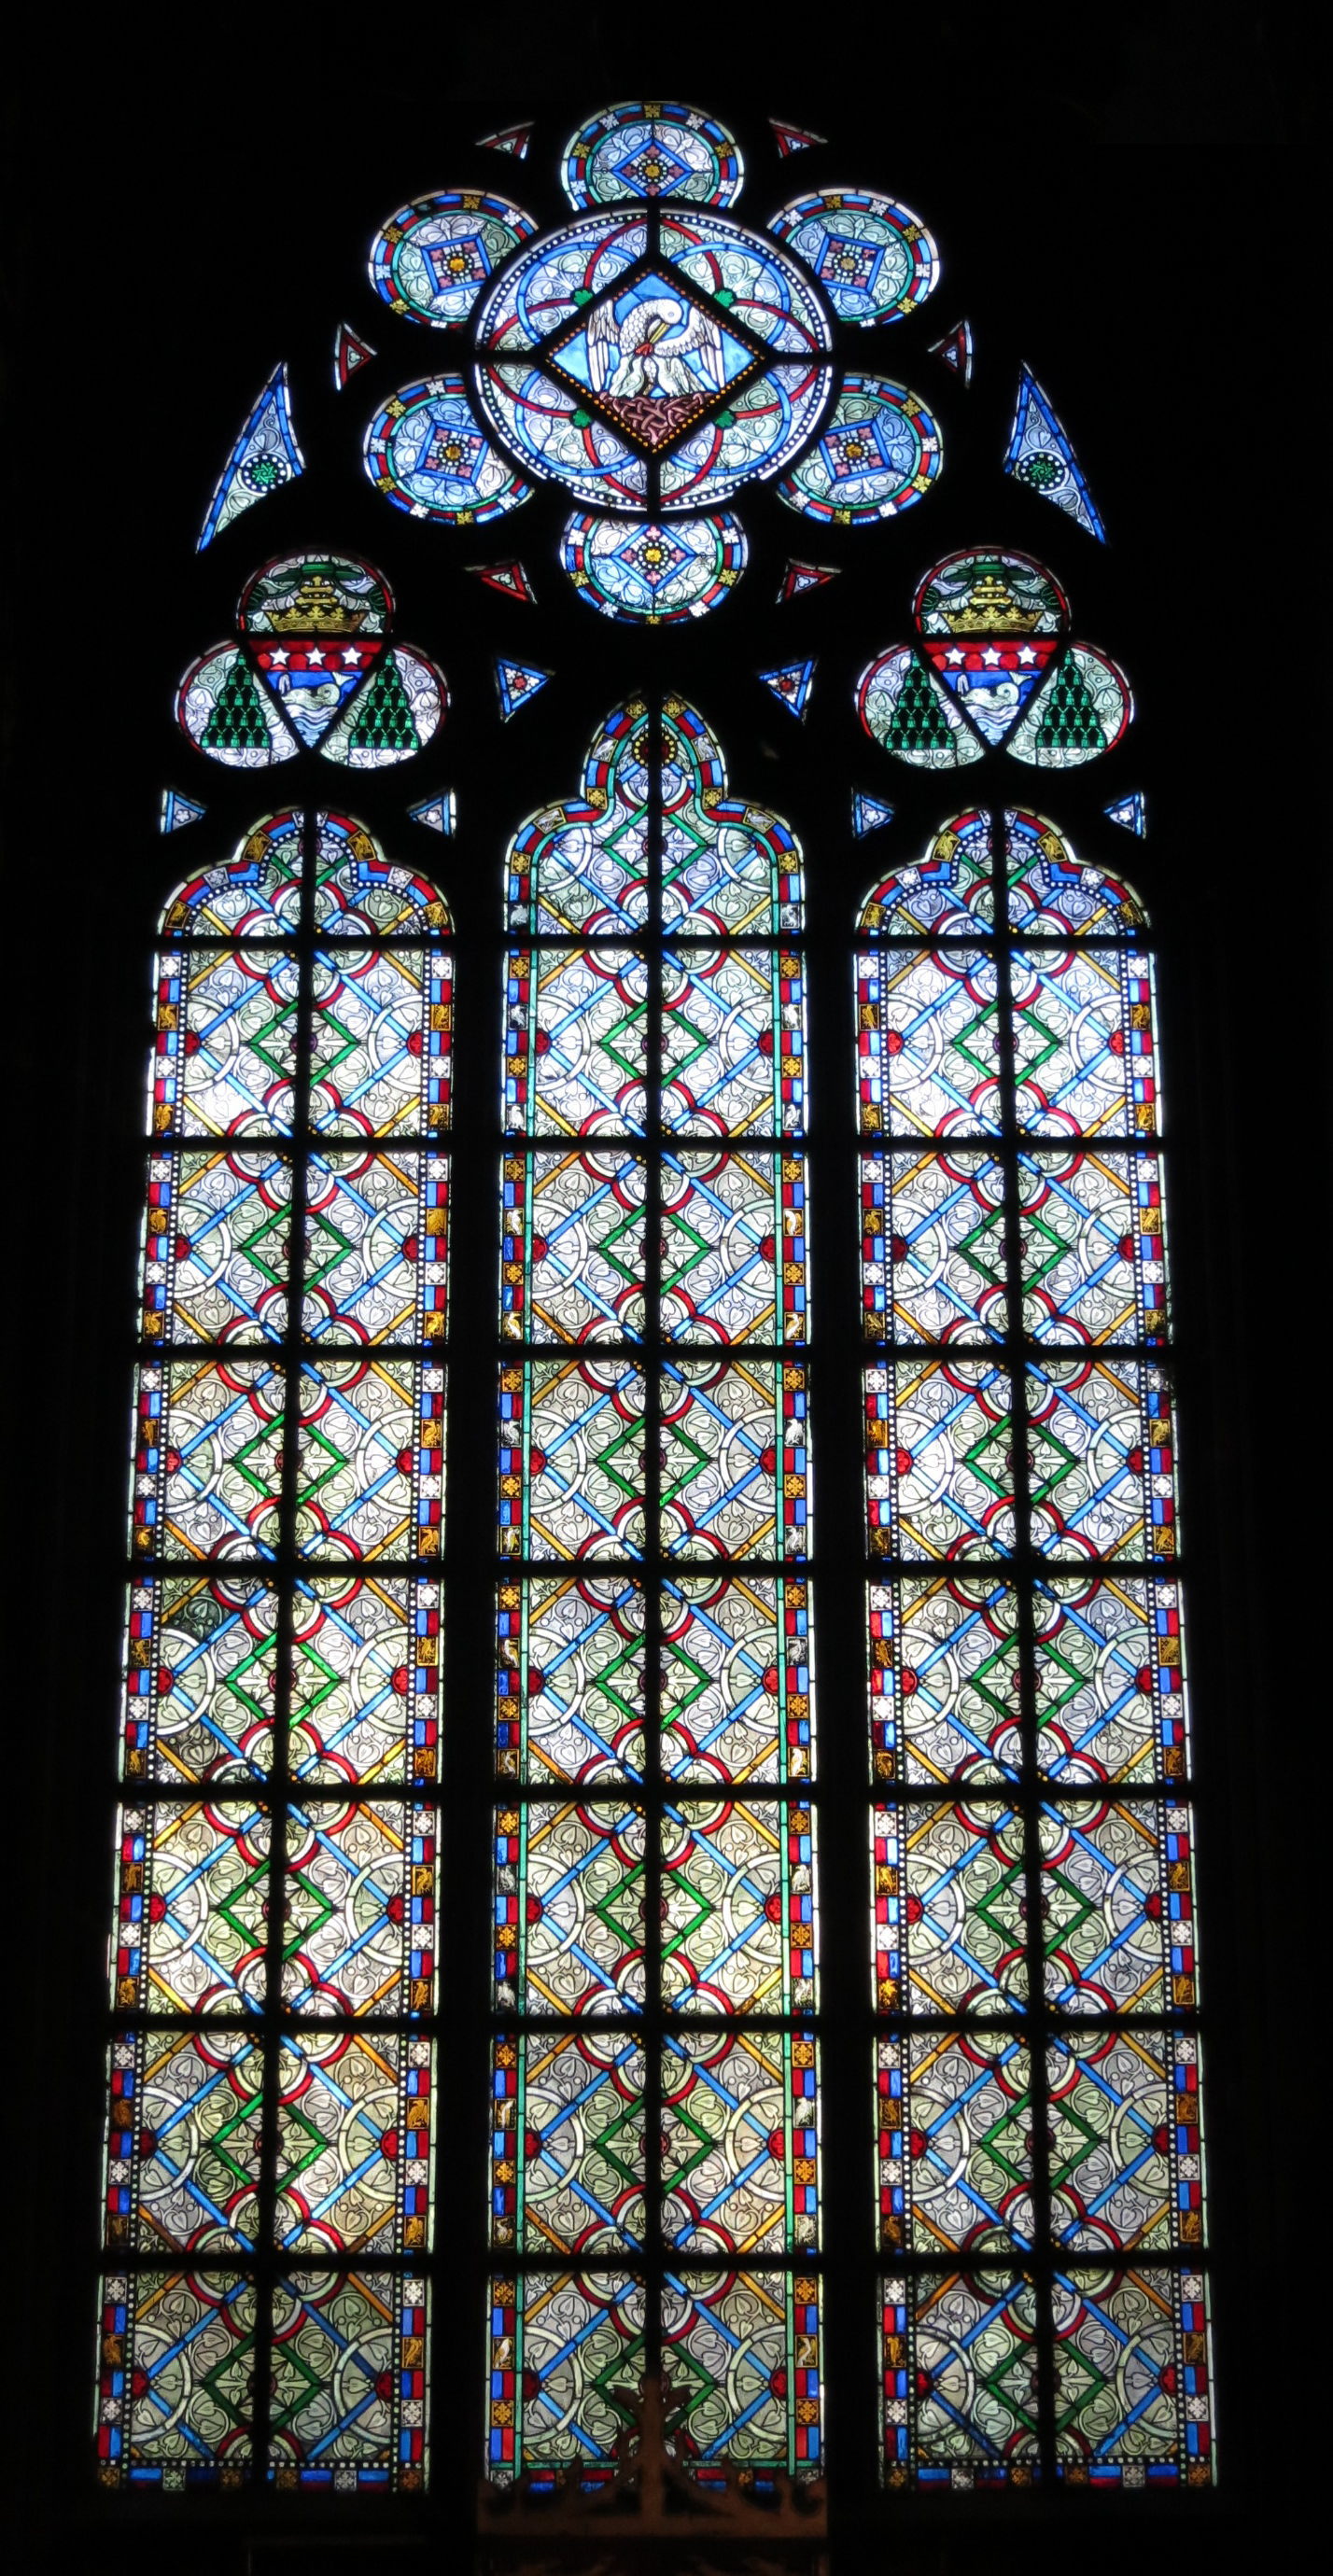 Stained glass window of Notre-Dame Cathedral in Paris - Denis-Auguste Affré